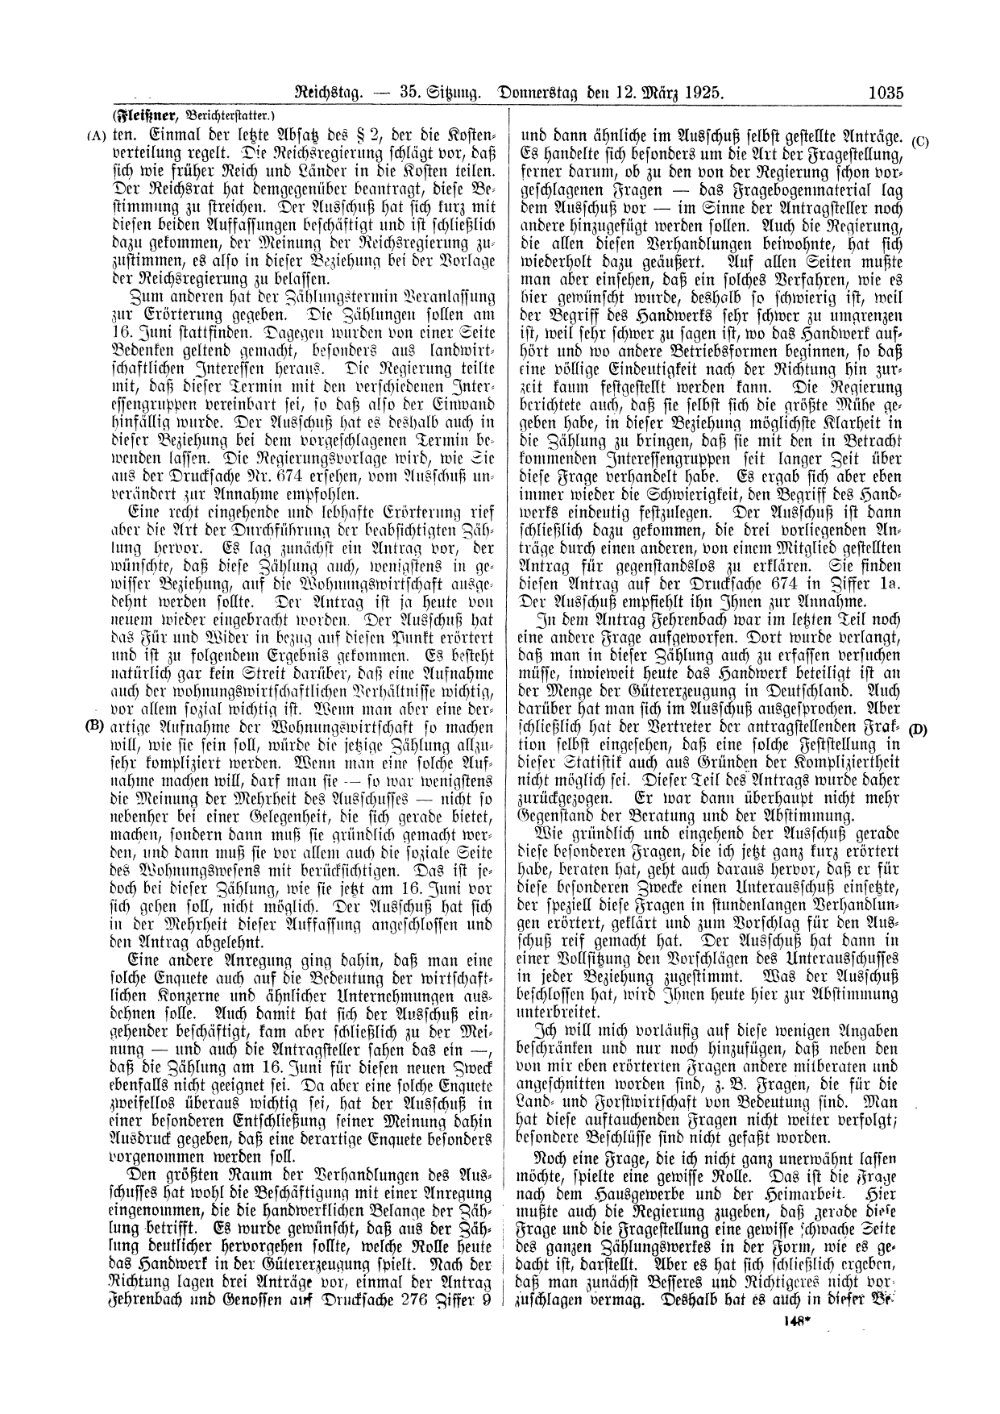 Scan of page 1035